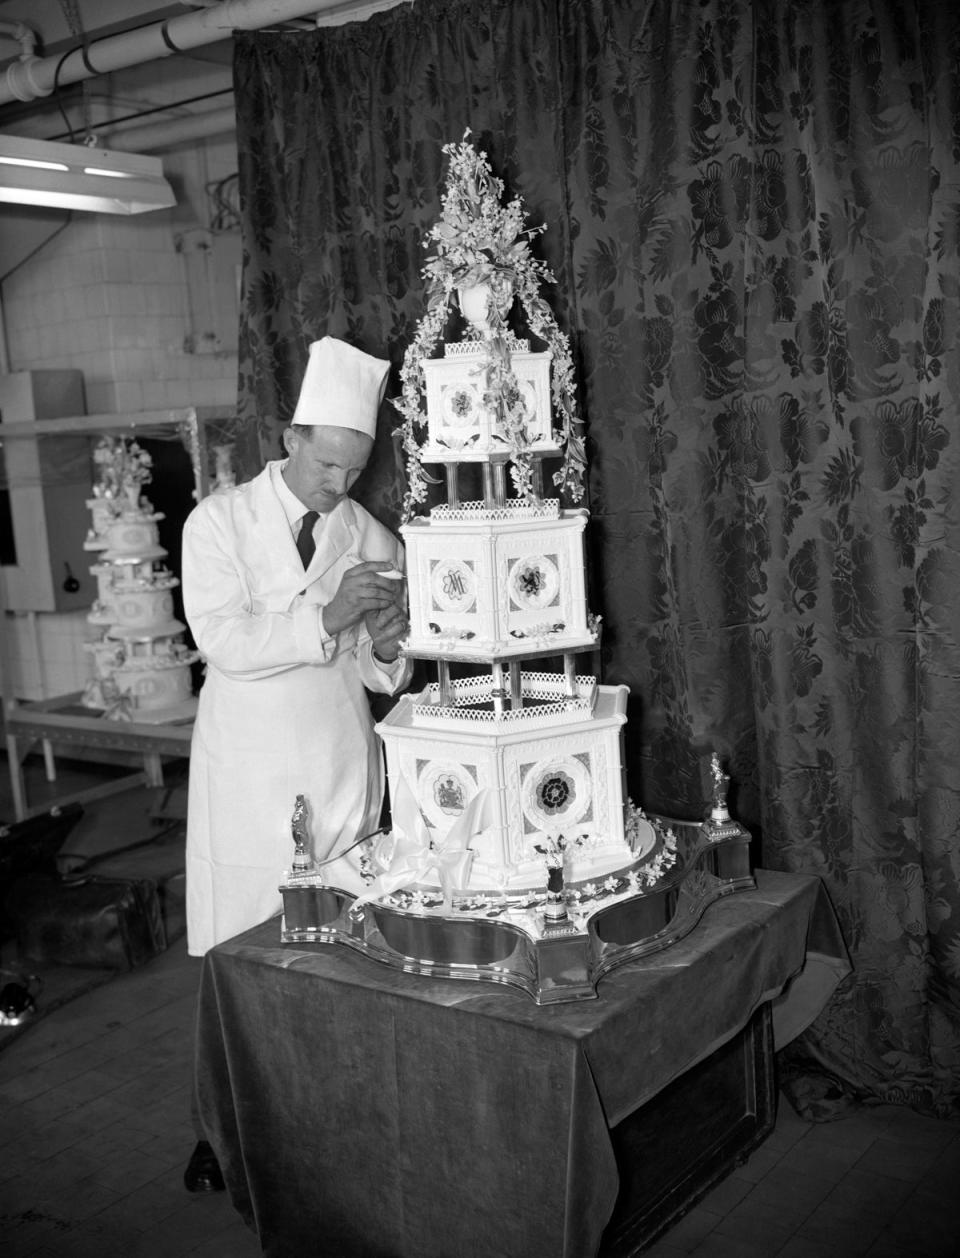 Official cake for the wedding of Princess Margaret and Antony Armstrong-Jones. (PA)